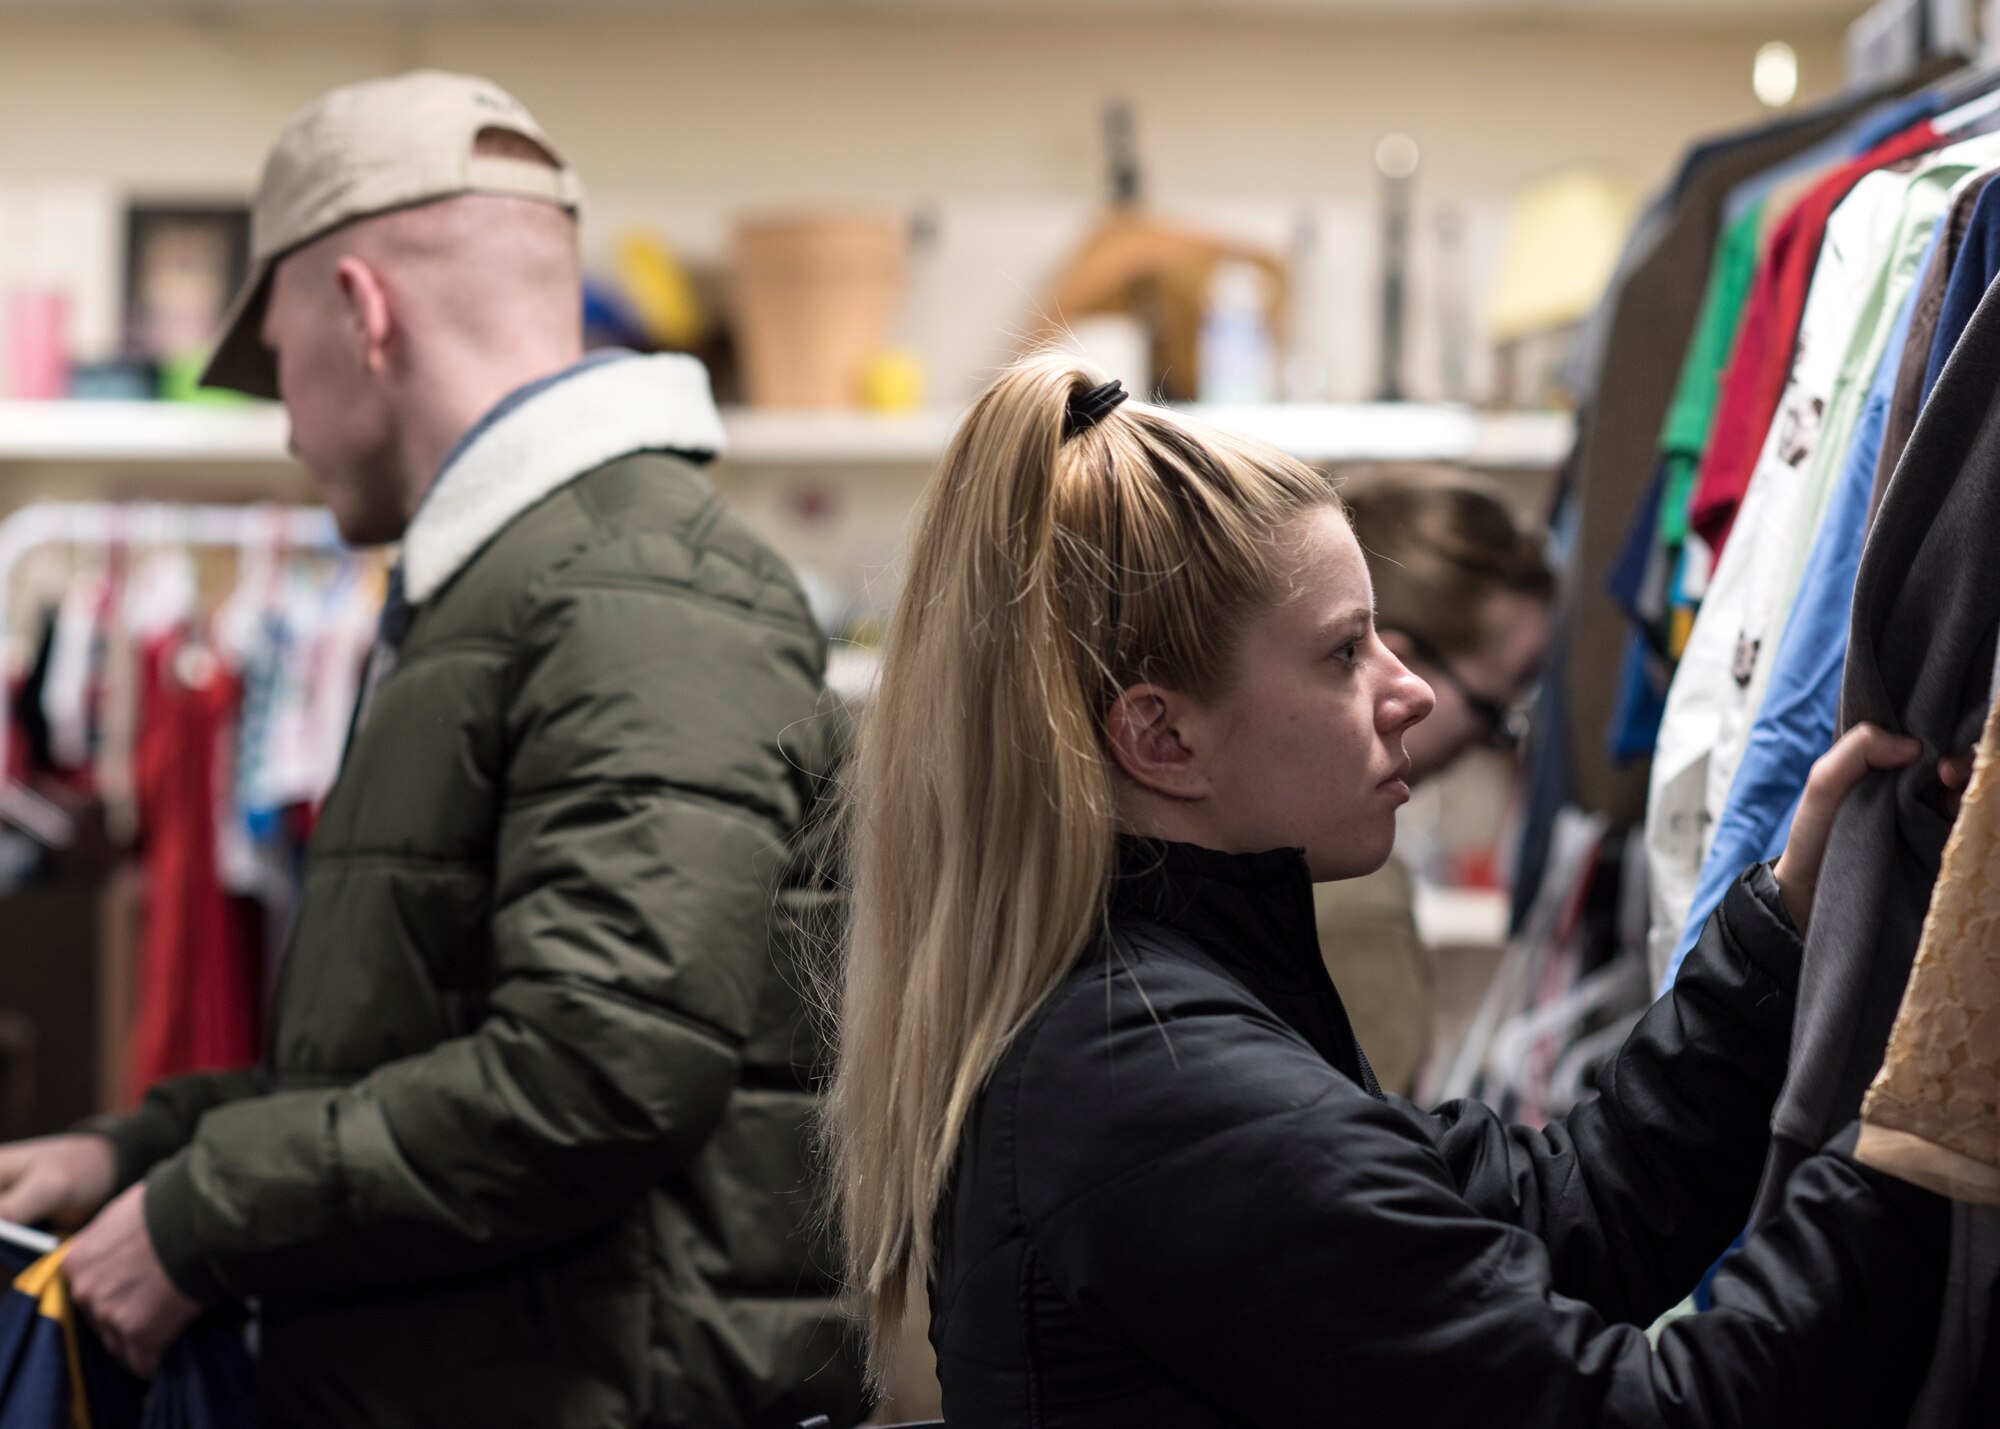 Customers at the Airman’s Attic look through clothes at Royal Air Force Lakenheath, England, Dec. 18, 2018. From uniforms and clothes to home appliances and toys, a wide variety can be found at the Airman’s Attic. (U.S. Air Force photo by Senior Airman Malcolm Mayfield)